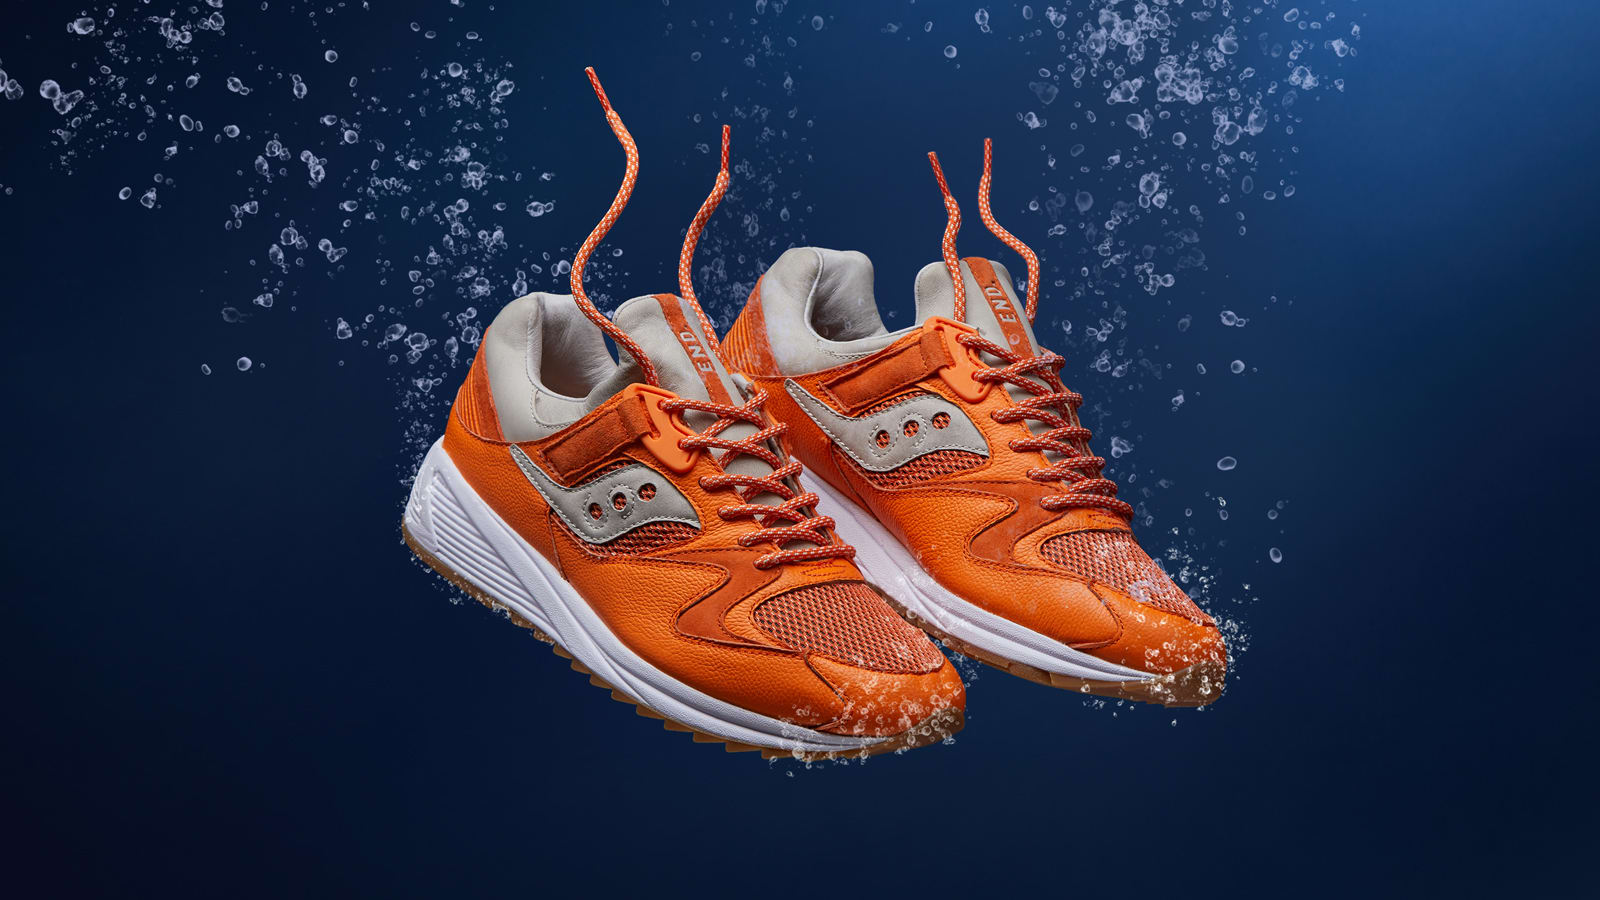 saucony-lobster-3